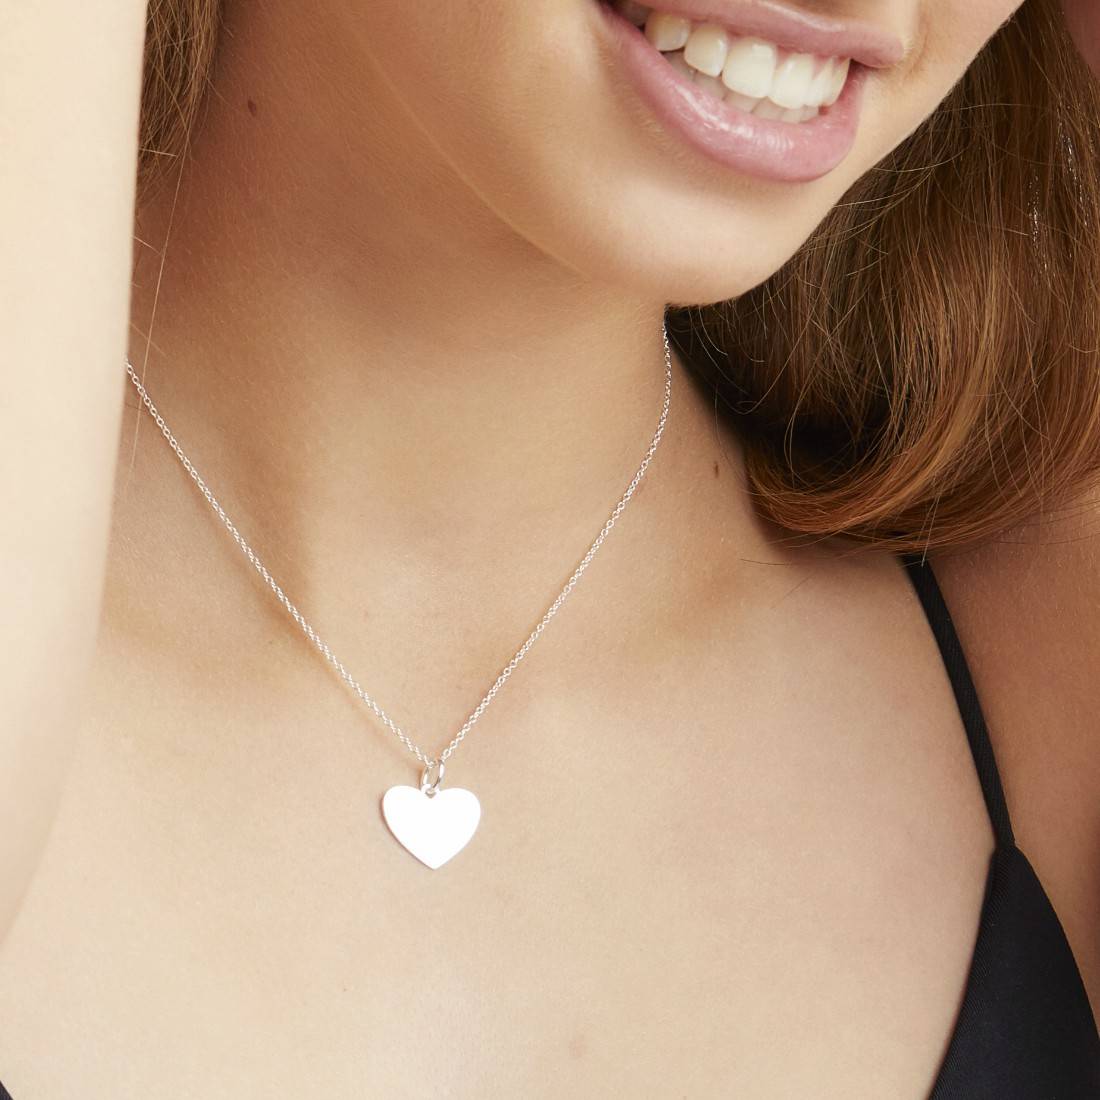 my name necklace - engrave your name on this heart pendant